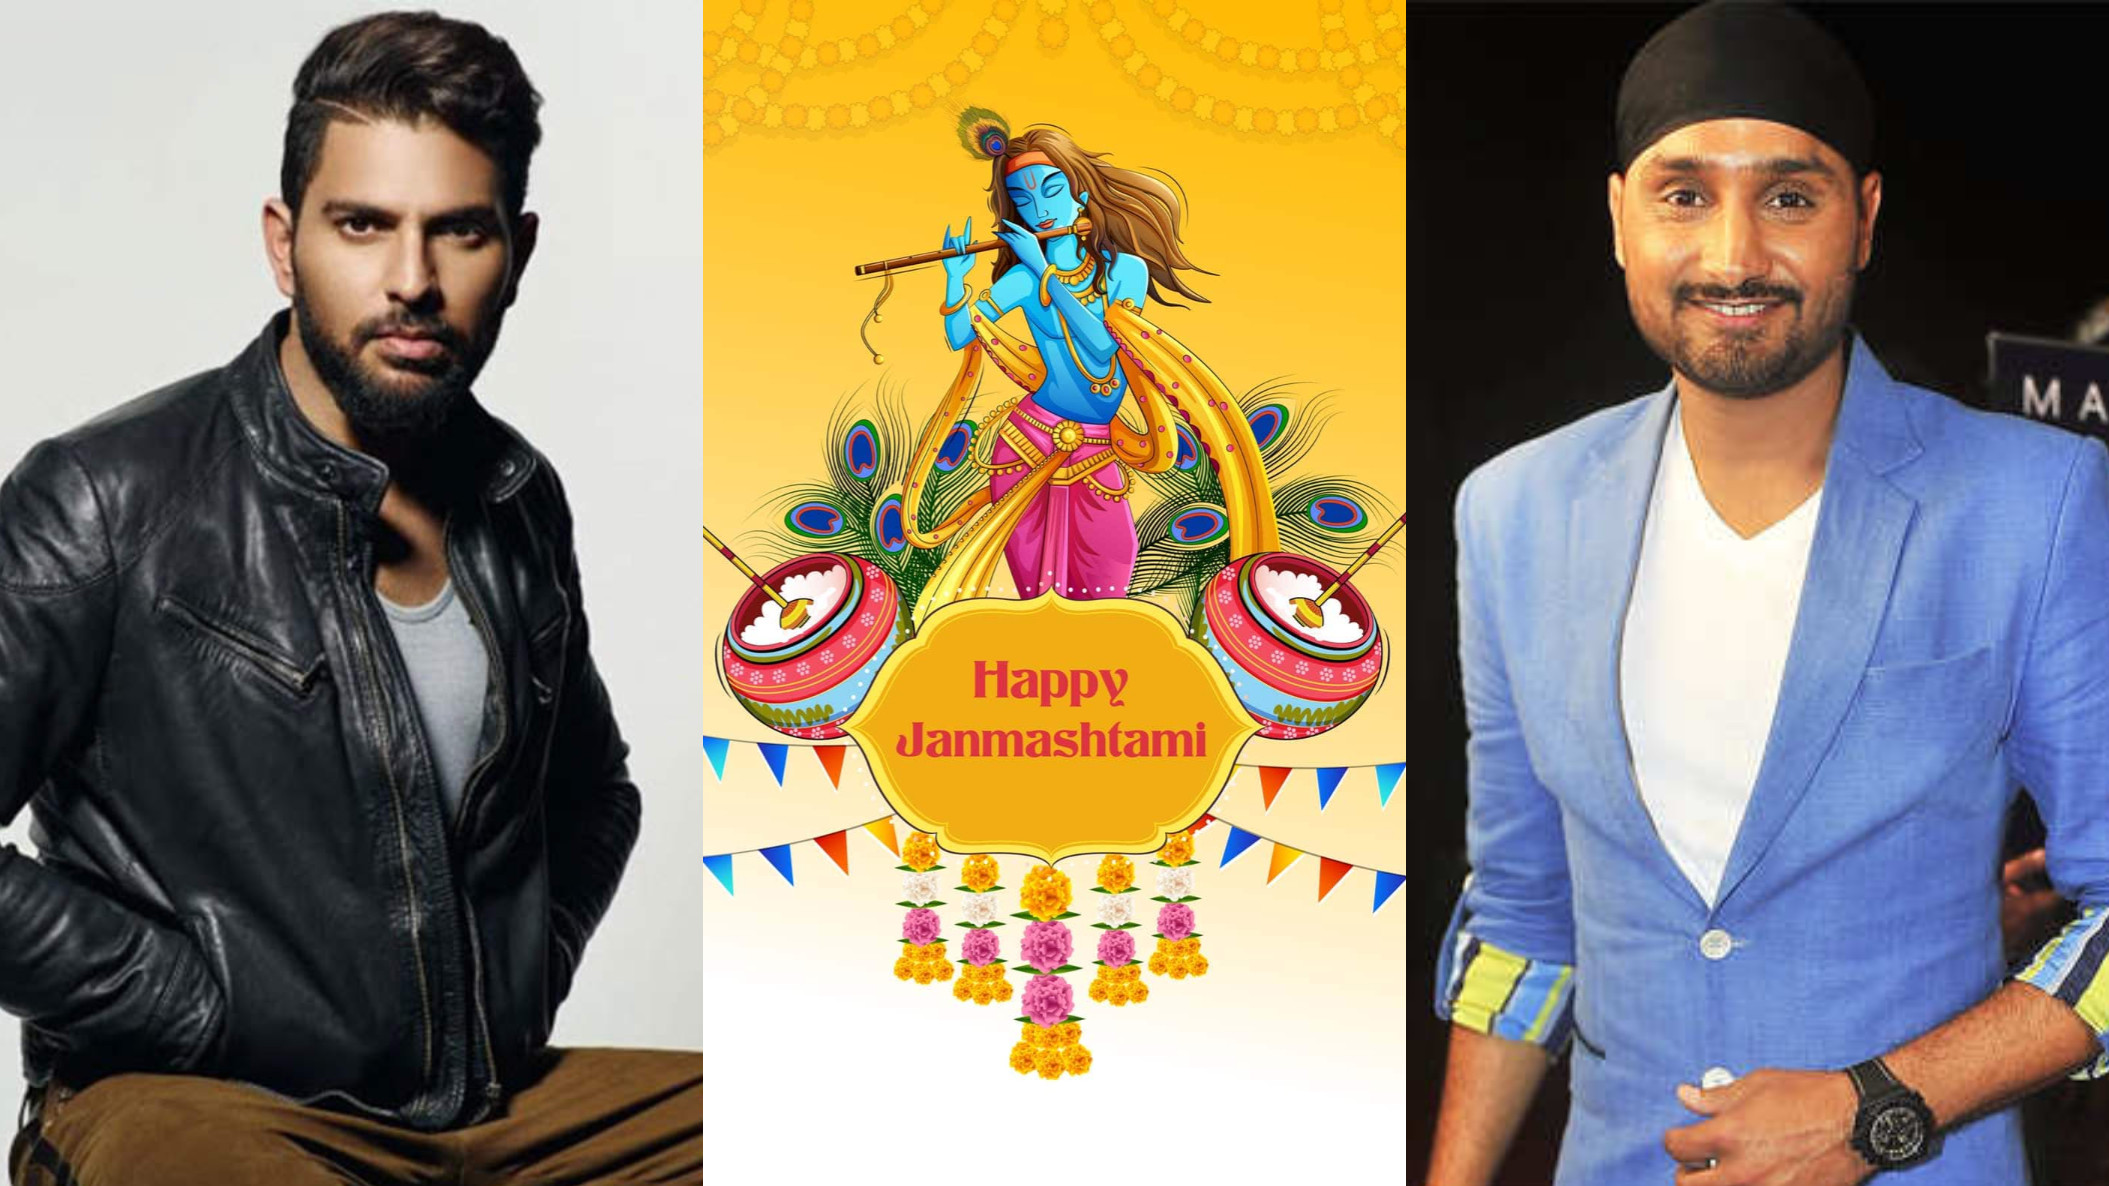 Indian cricketers wish everyone on the holy occasion of Janmashtami